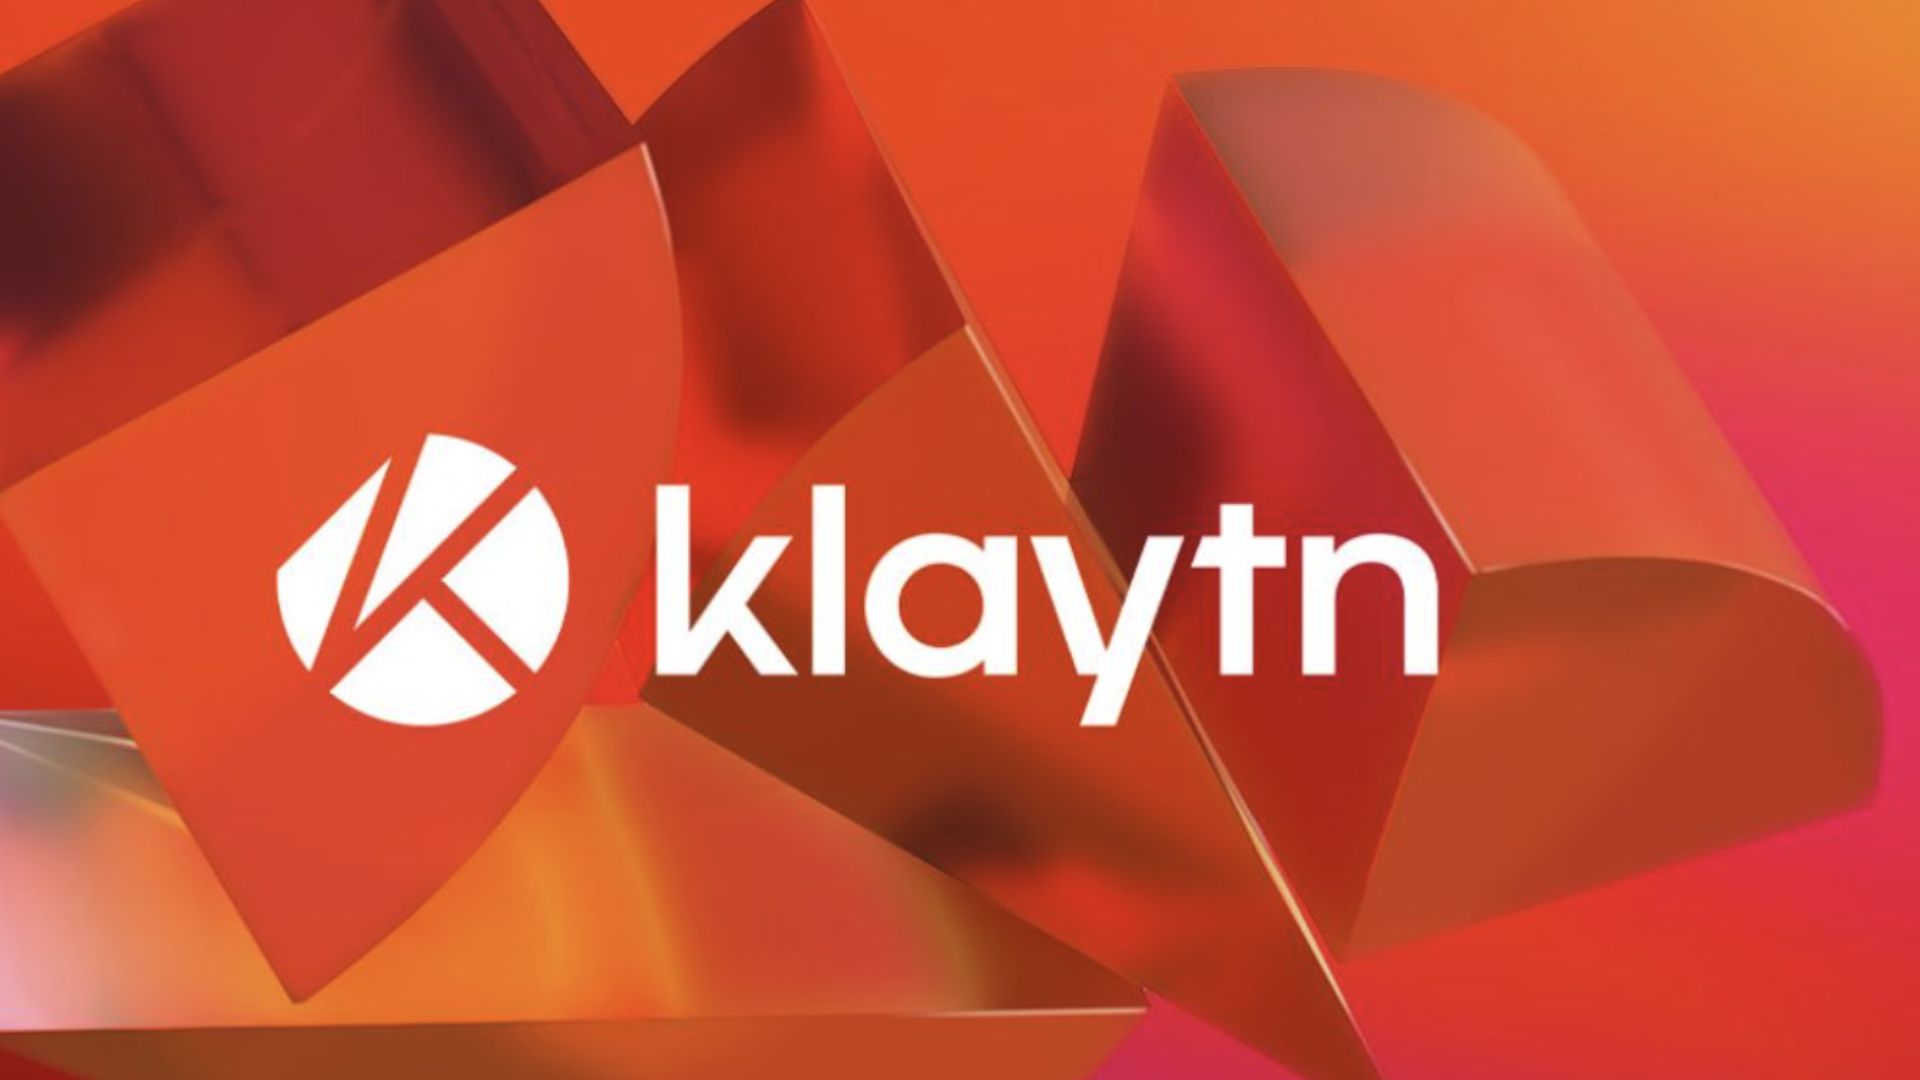 Klaytn Price Prediction: KLAY Coin Pumps 13% To Reach Six-Month High While Casino Token Pays Out 25% On Lost Bets